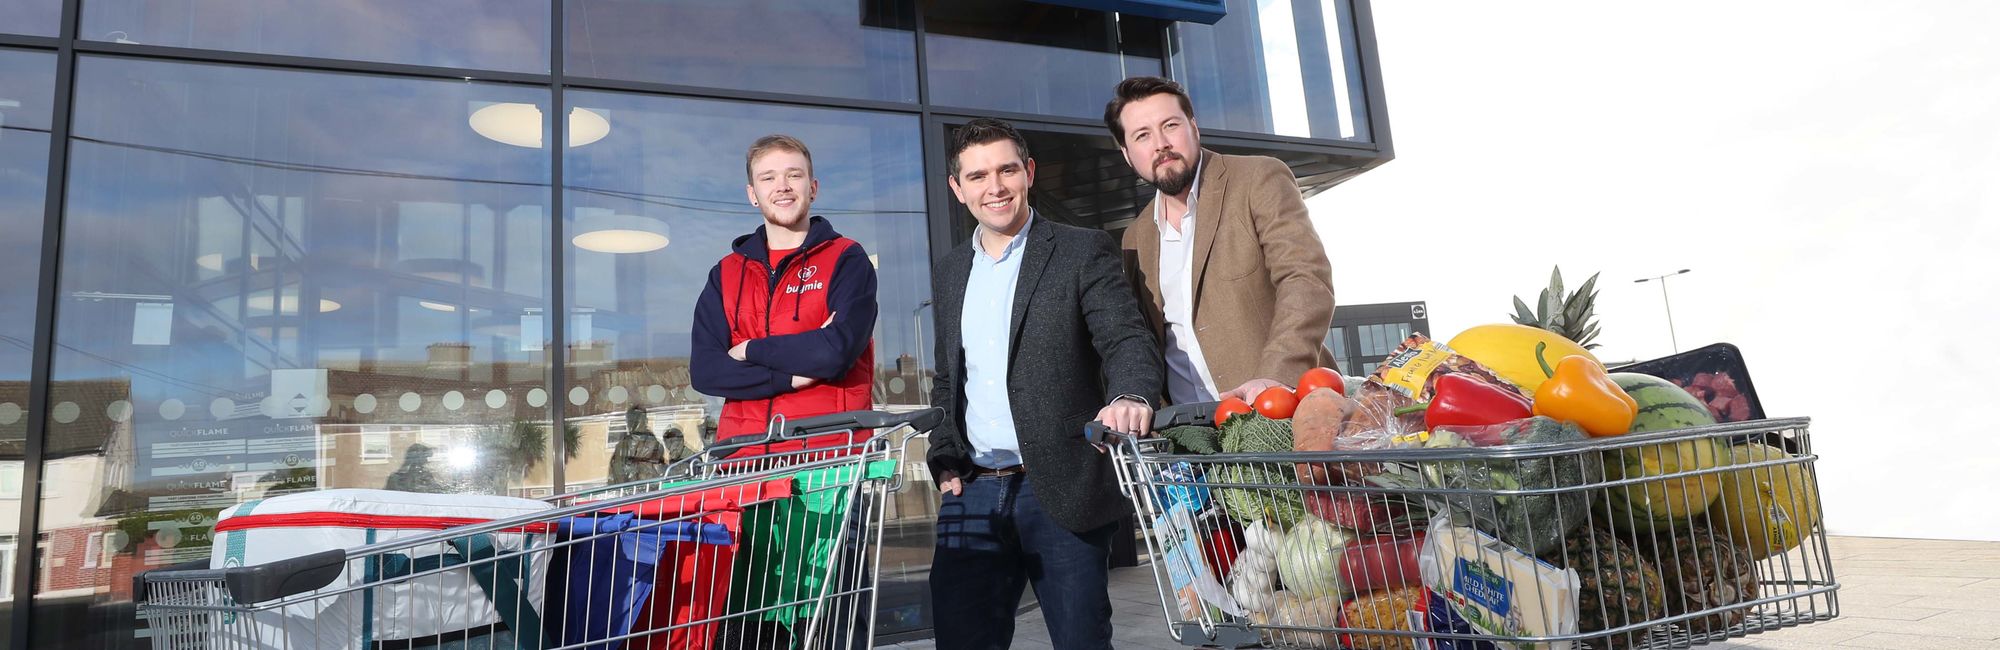 lidl-2019-buymie-delivery-shopping-grocery-online-app